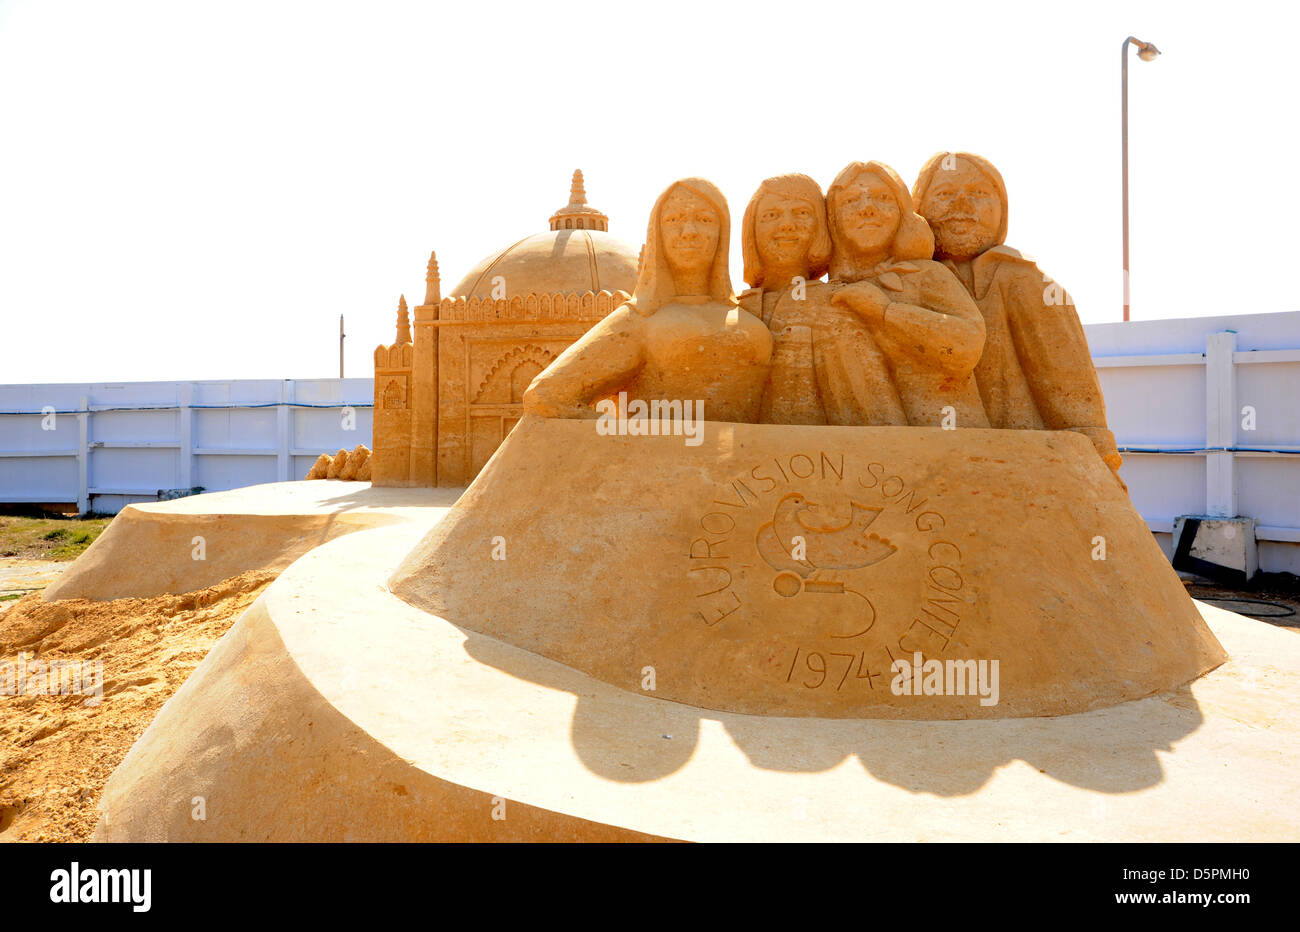 Brighton, Sussex, UK. 7th April 2013.  Abba who won the Eurovision Song Contest in Brighton are amongst the figures on display at the Sand Sculpture Festival 2013 which this year has a musical theme . It is due to open to the public tomorrow. Stock Photo